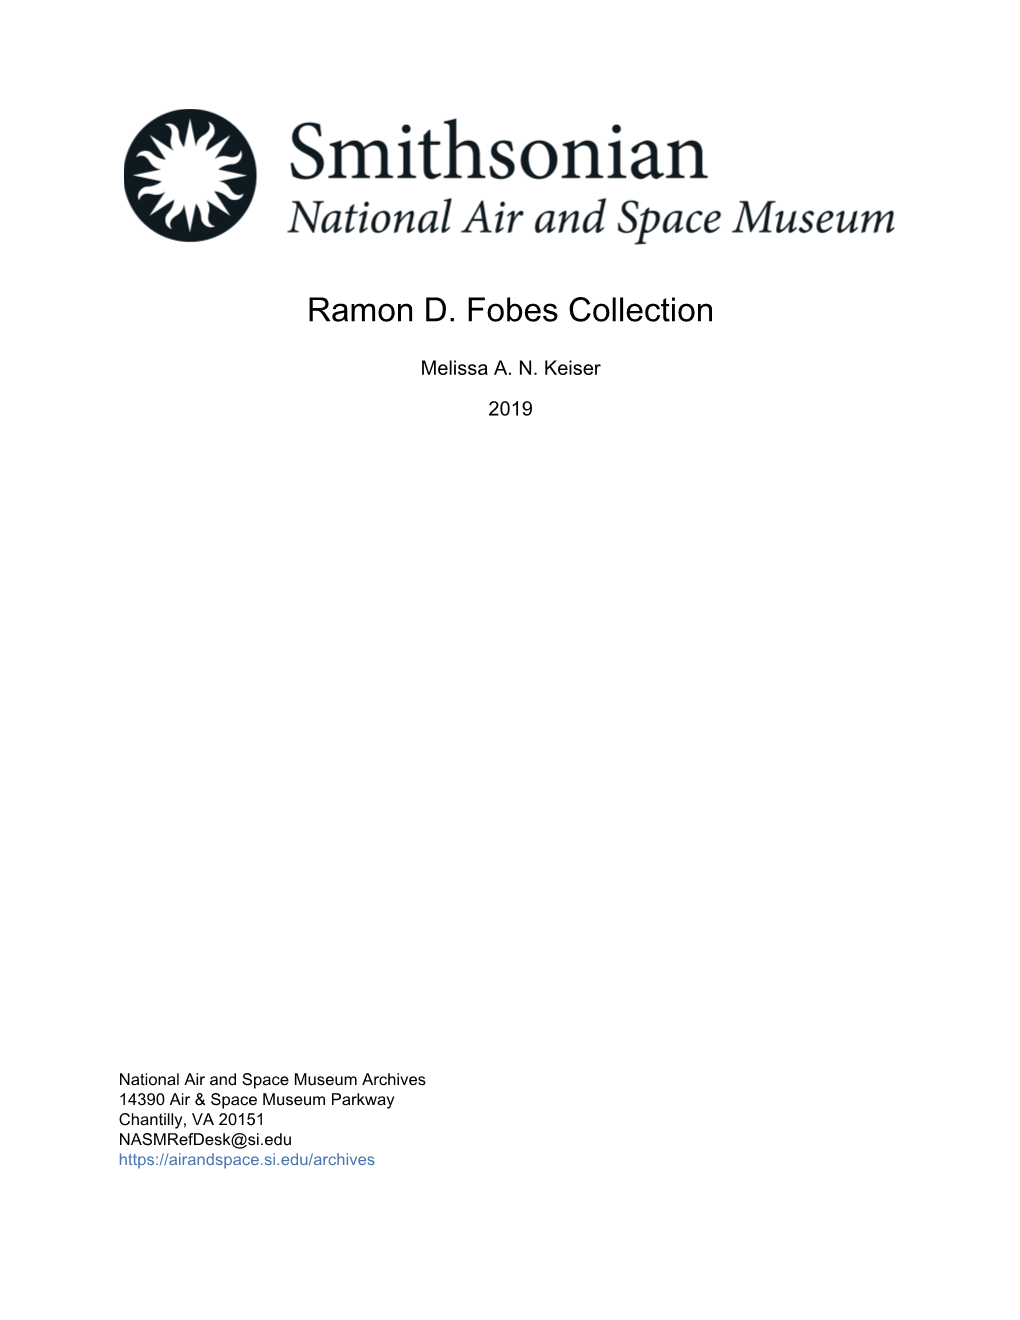 Ramon D. Fobes Collection